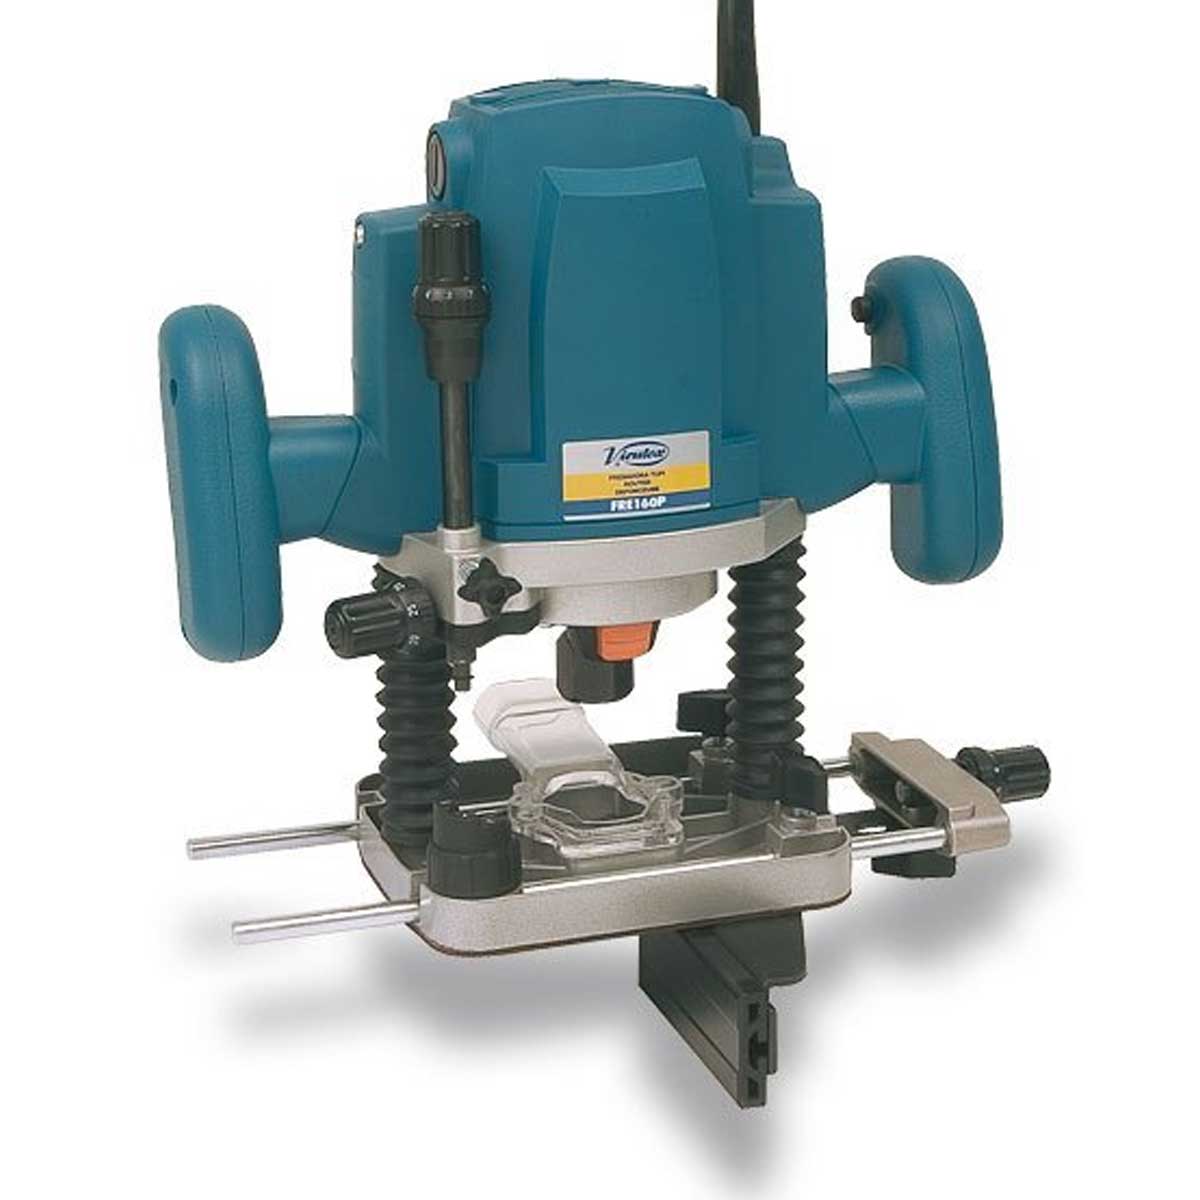 European Hand Router Manufacturers, Suppliers in Kanpur